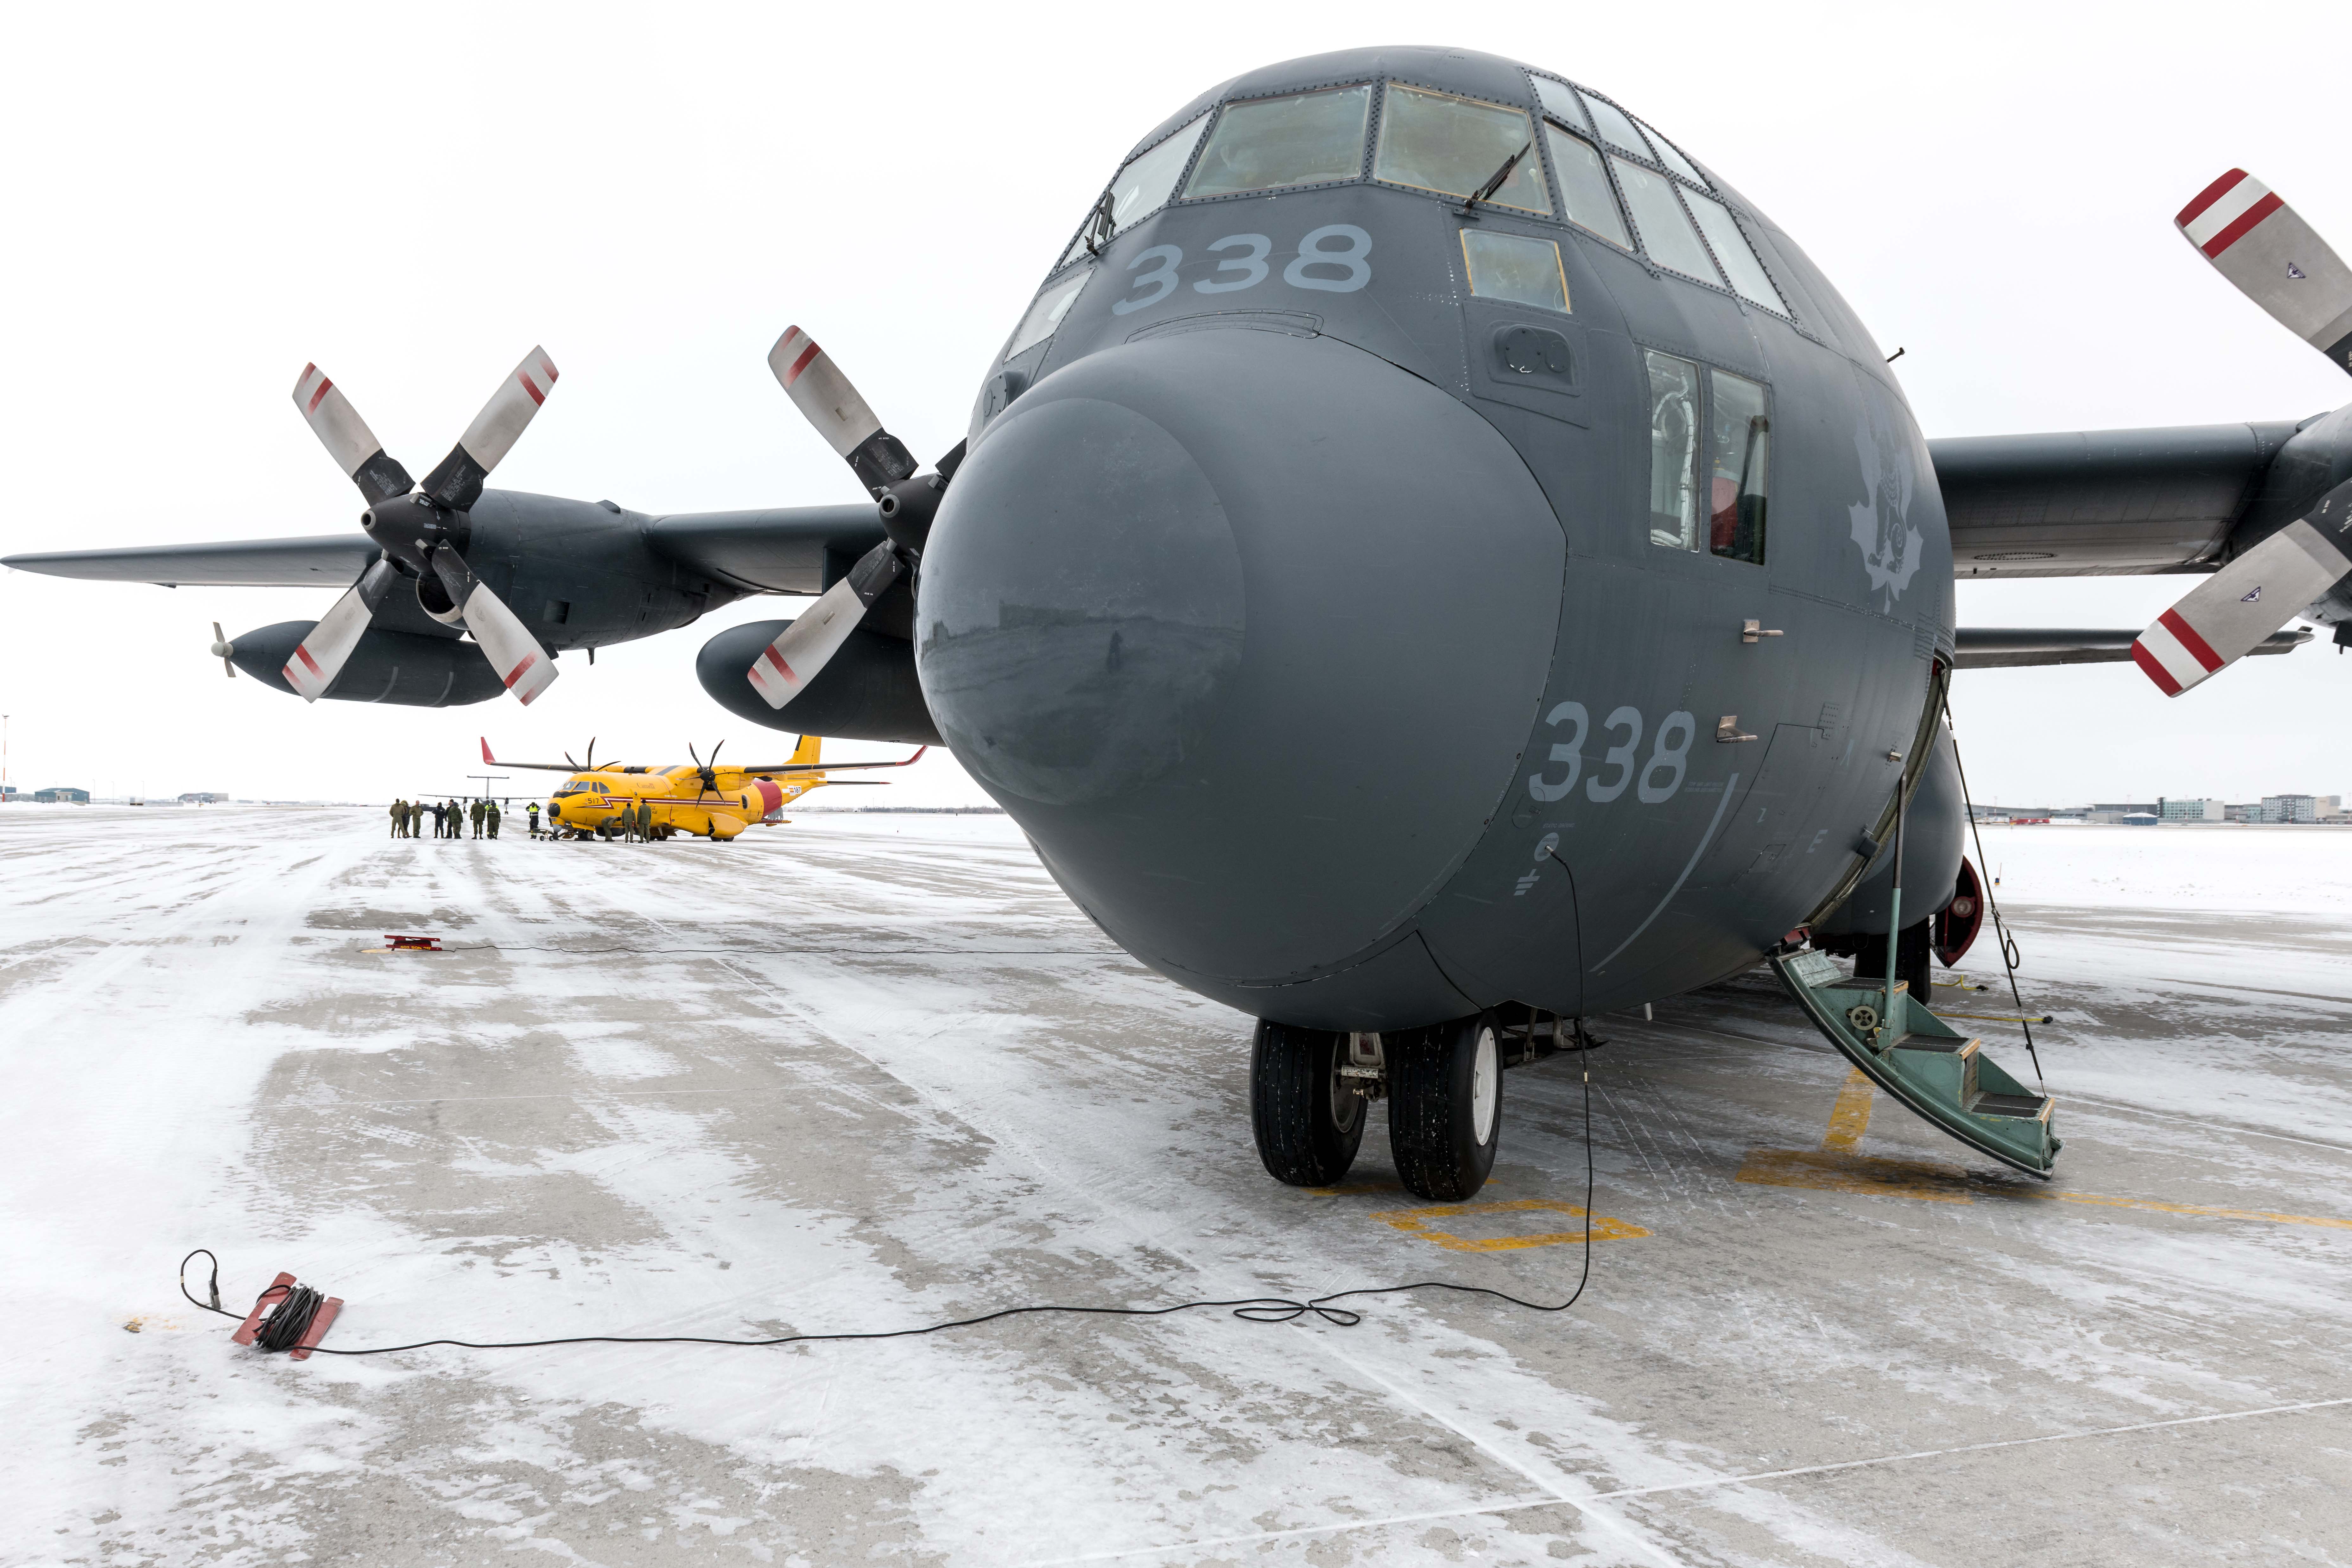 Air Operations Support Technicians can find themselves on the job, touching aircraft, like this CC-130 Hercules, much sooner than some joining into other occupations. PHOTO: Sgt Daren Kraus, 17 Wing Winnipeg